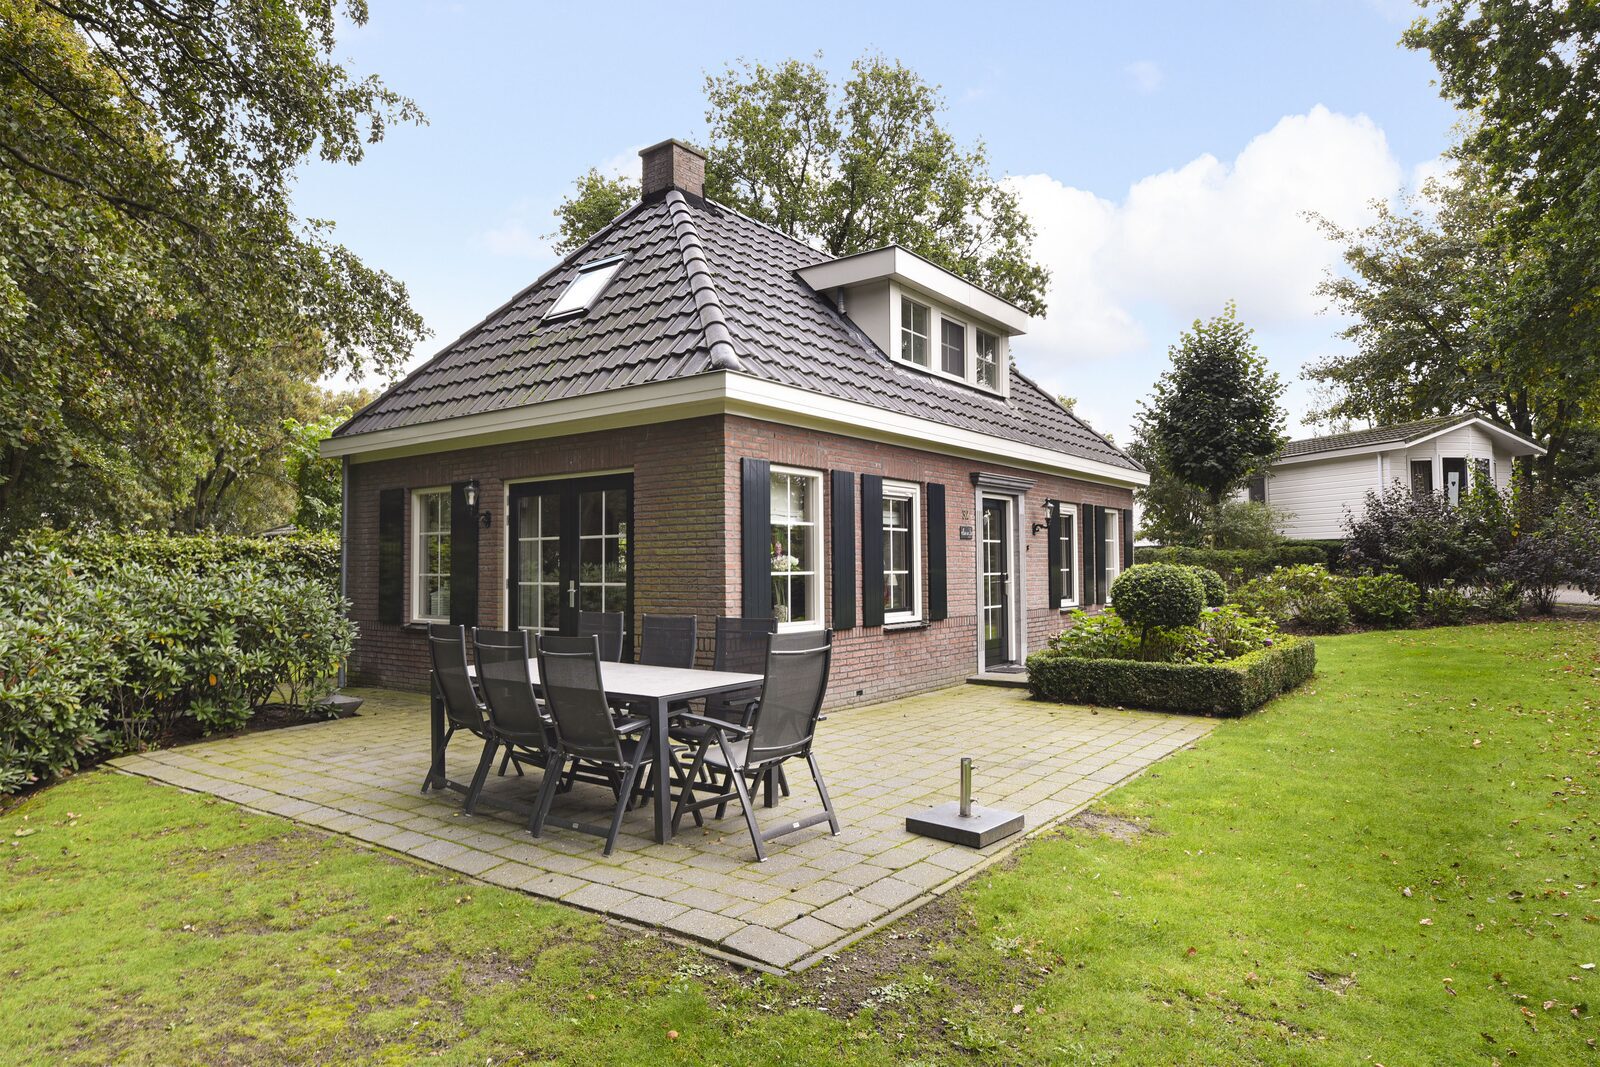 Rent a home at the Veluwe for eight persons